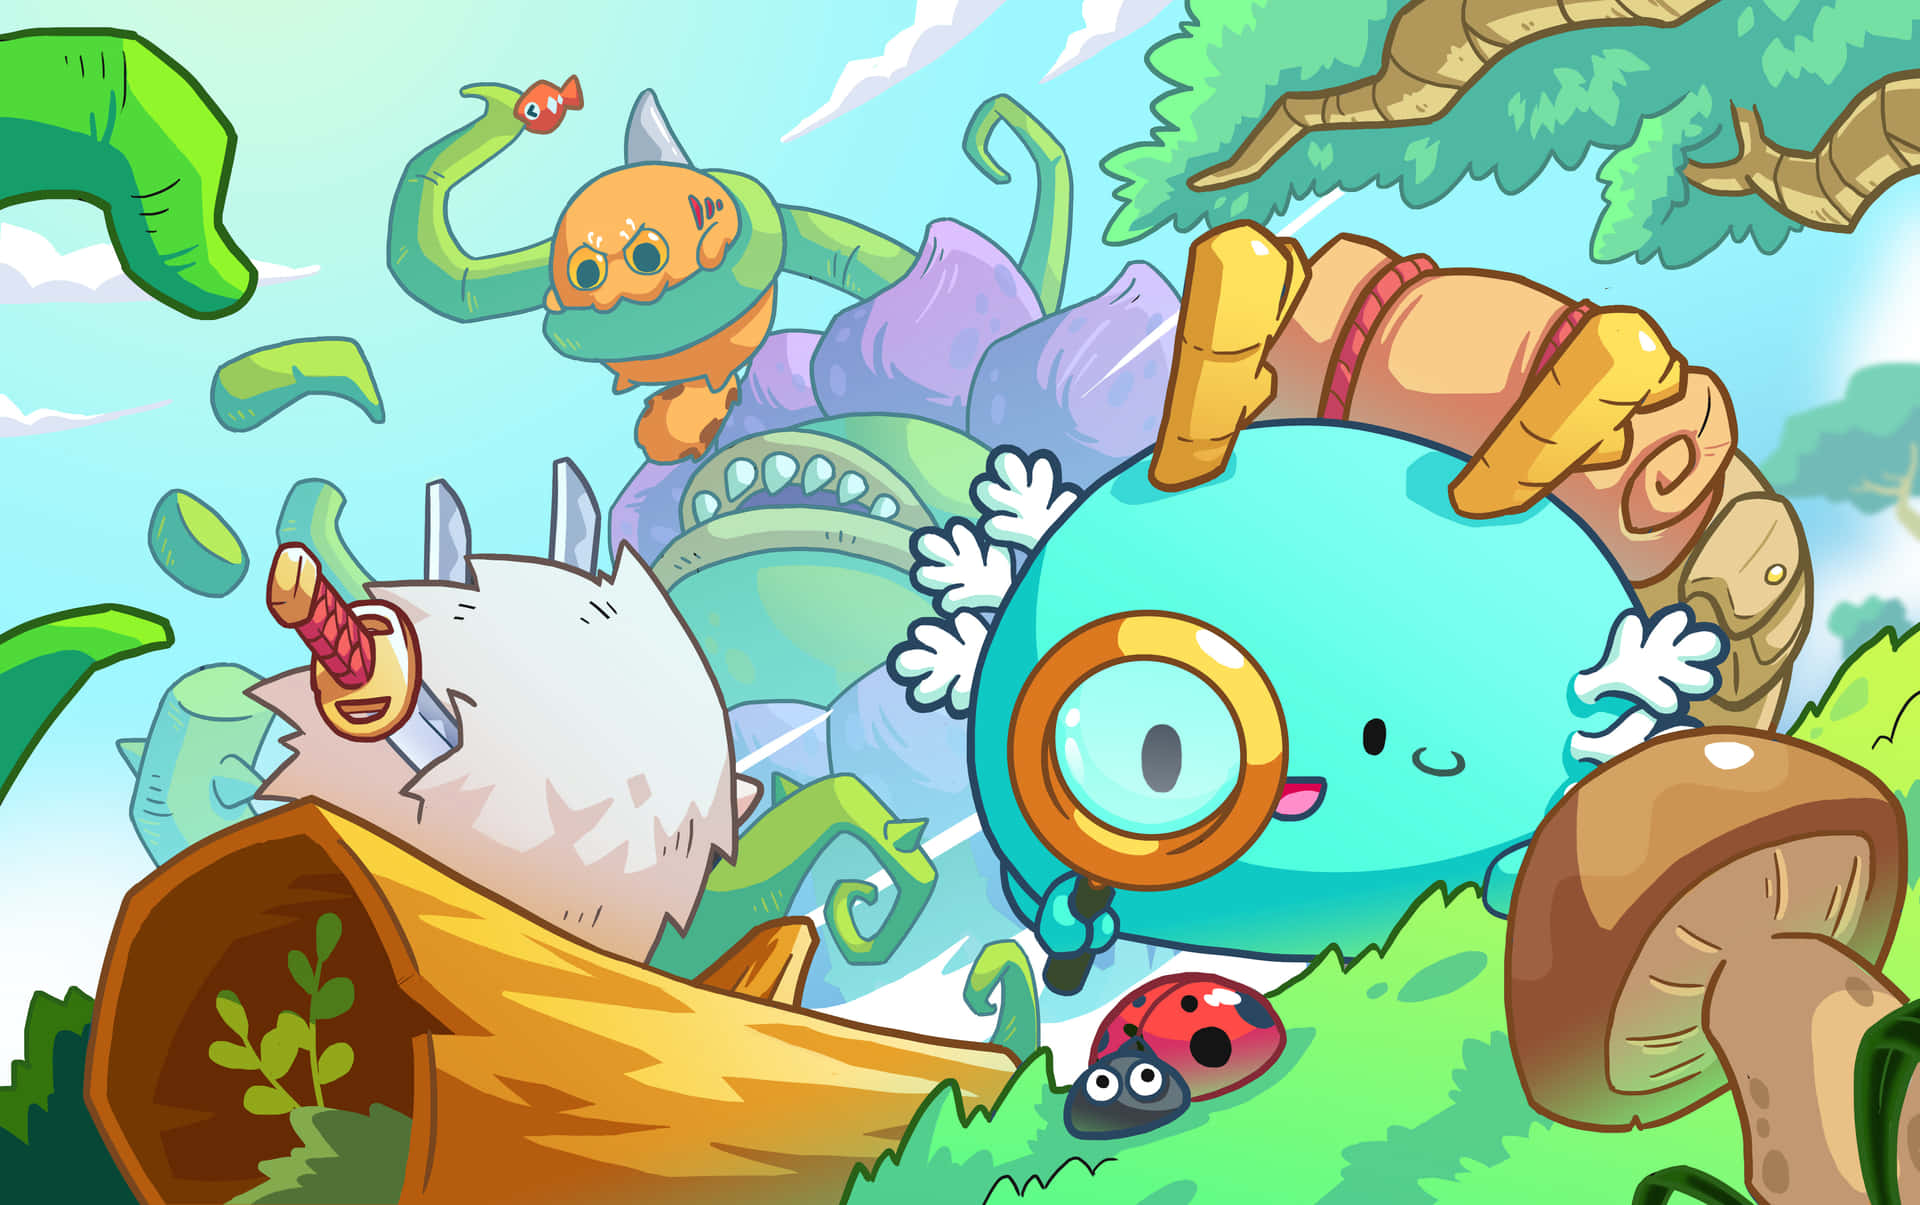 Explore the boundless adventures of the blockchain game Axie Infinity